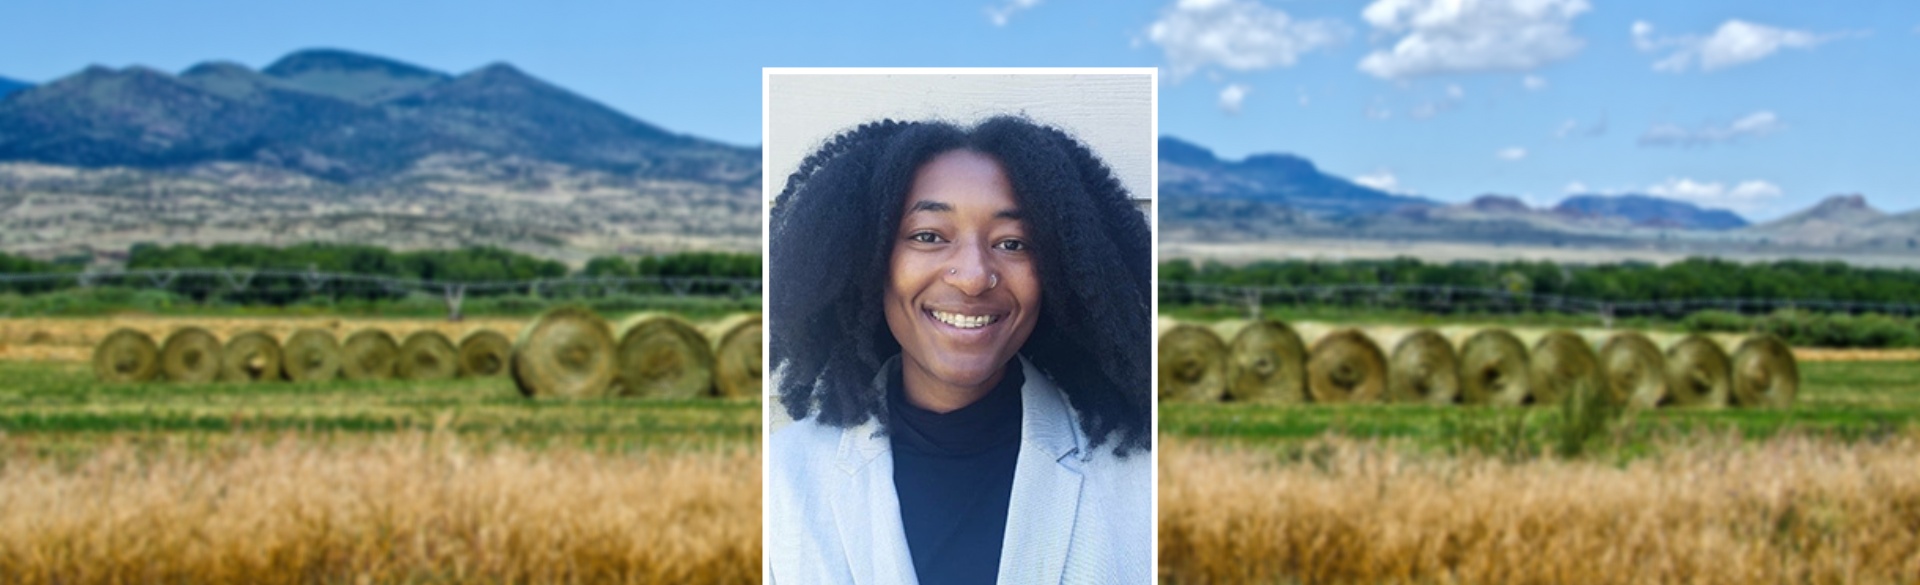 Woman smiling in headshot on background of Colorado mountains